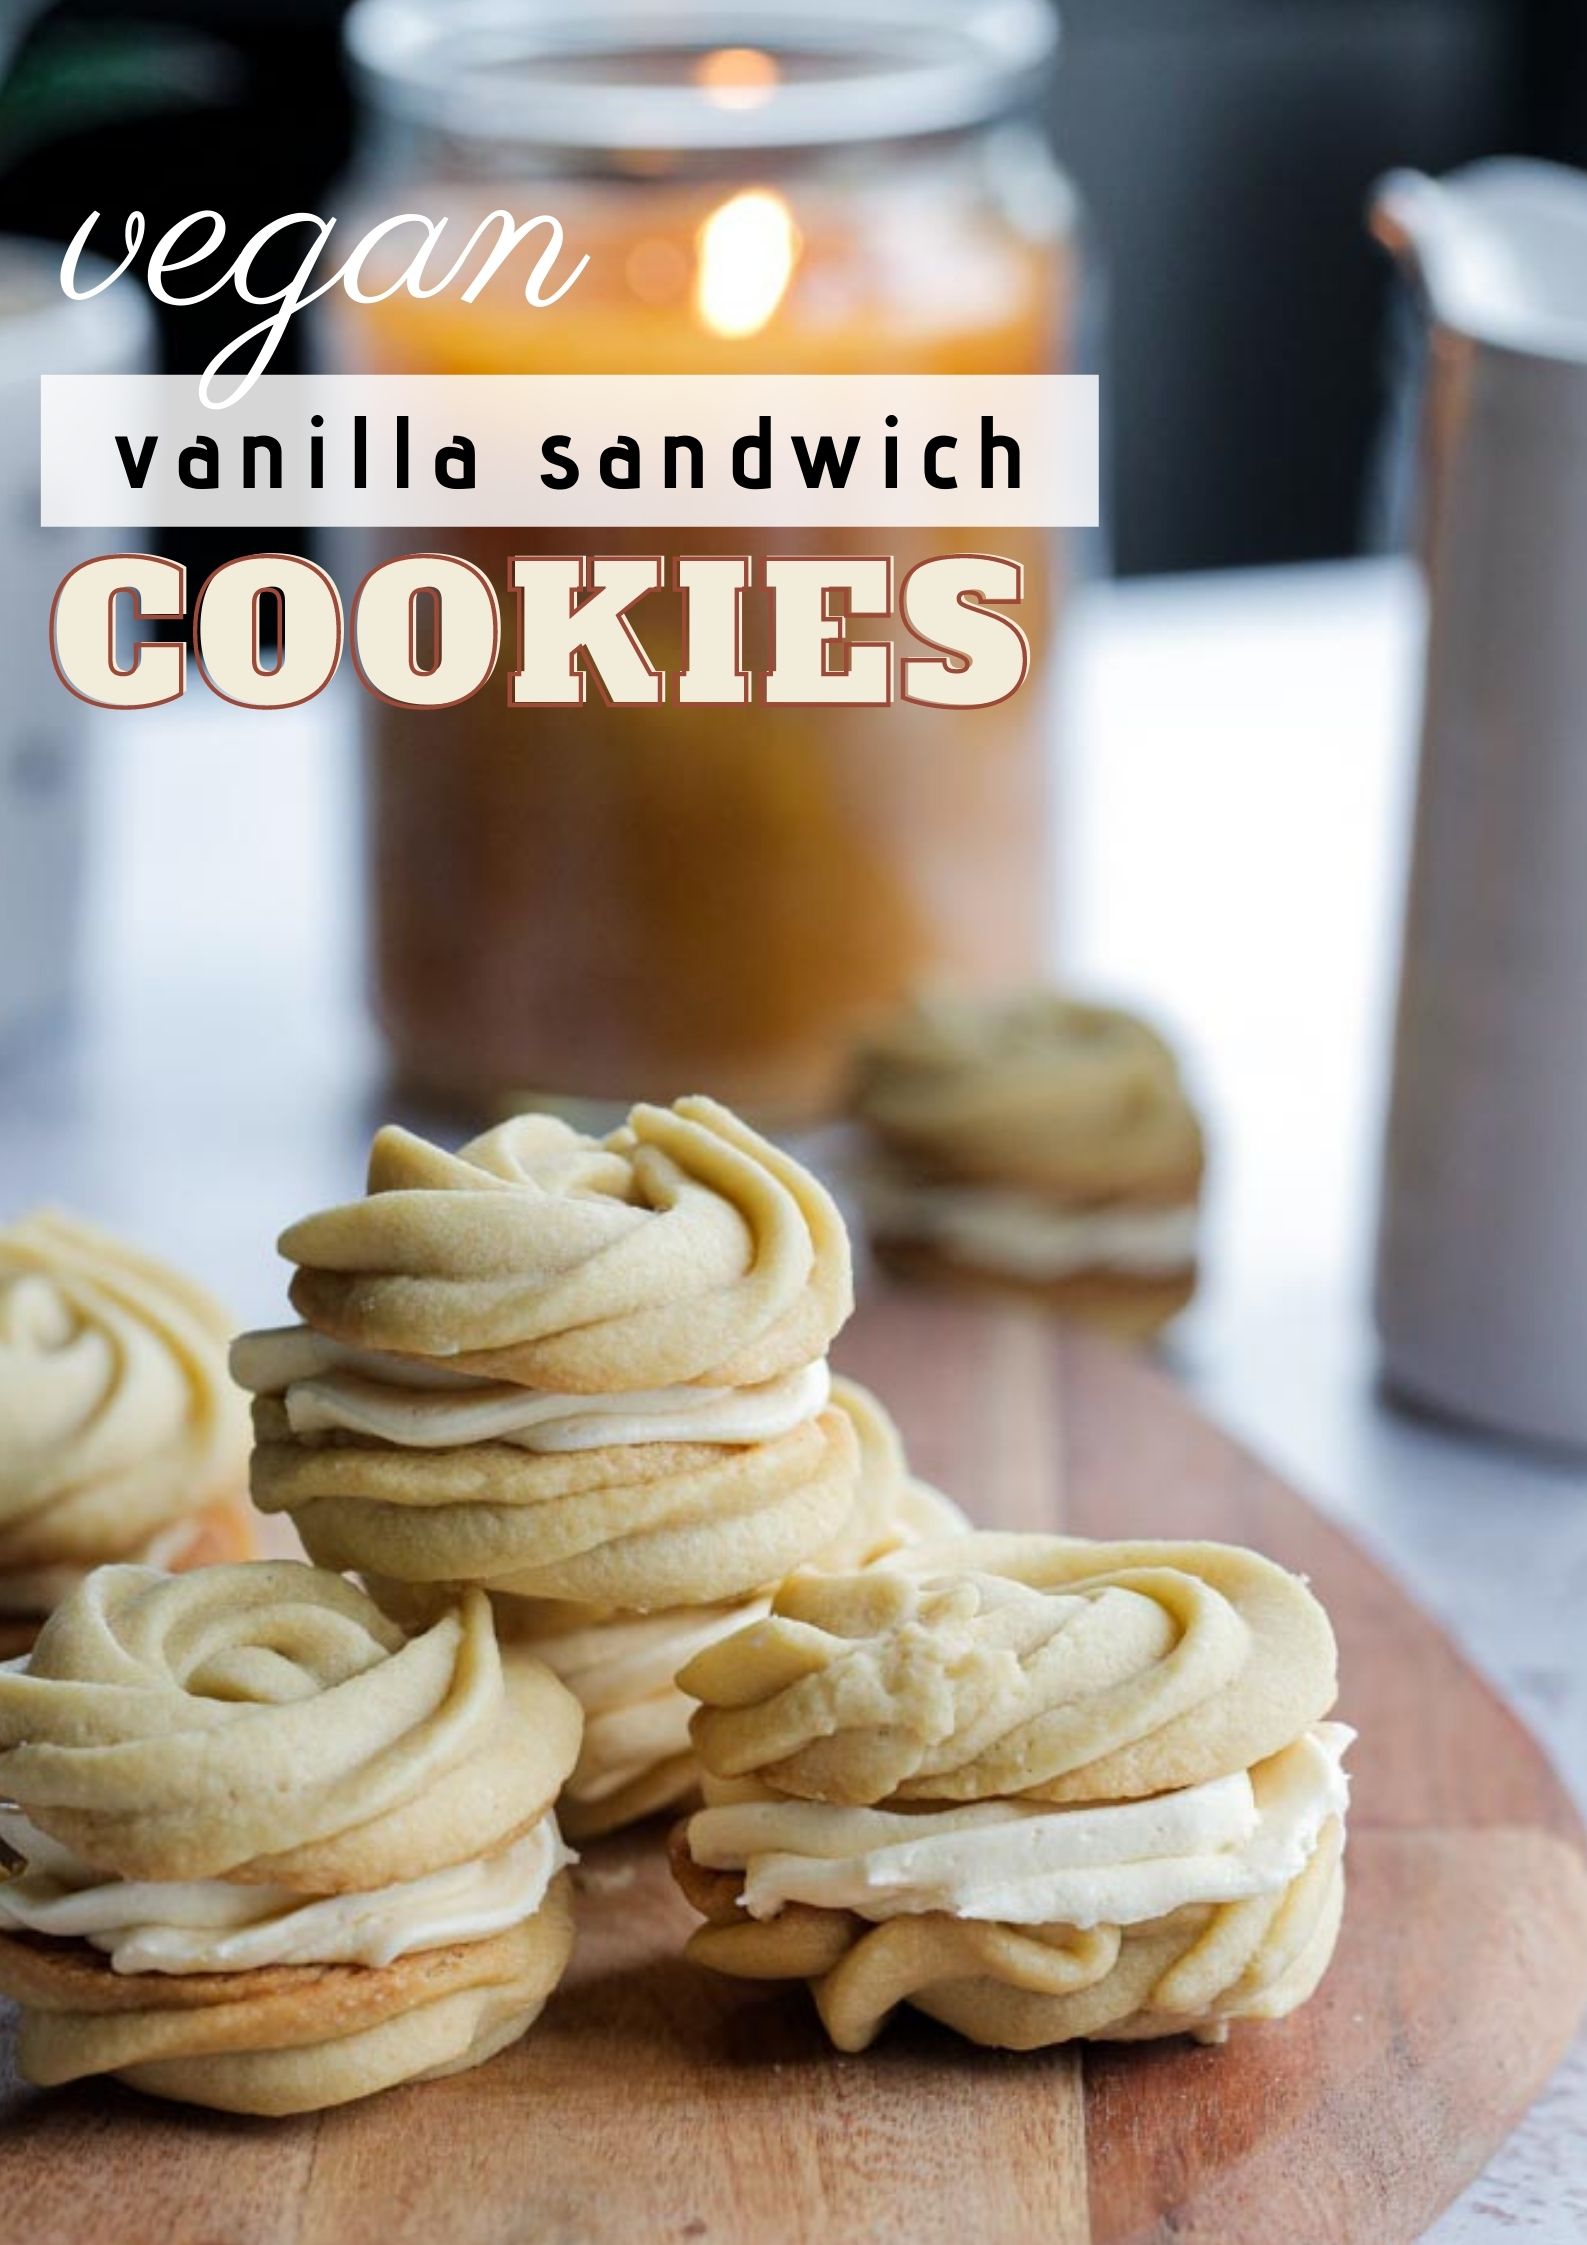 Soft, buttery and melt in the mouth these vegan vanilla sandwich cookies filled with vanilla buttercream are an easy to bake delicate little treat! Recipe on thecookandhim.com #vegancookies #veganbaking #vanillacookies #sandwichcookies #vanilla #veganrecipes